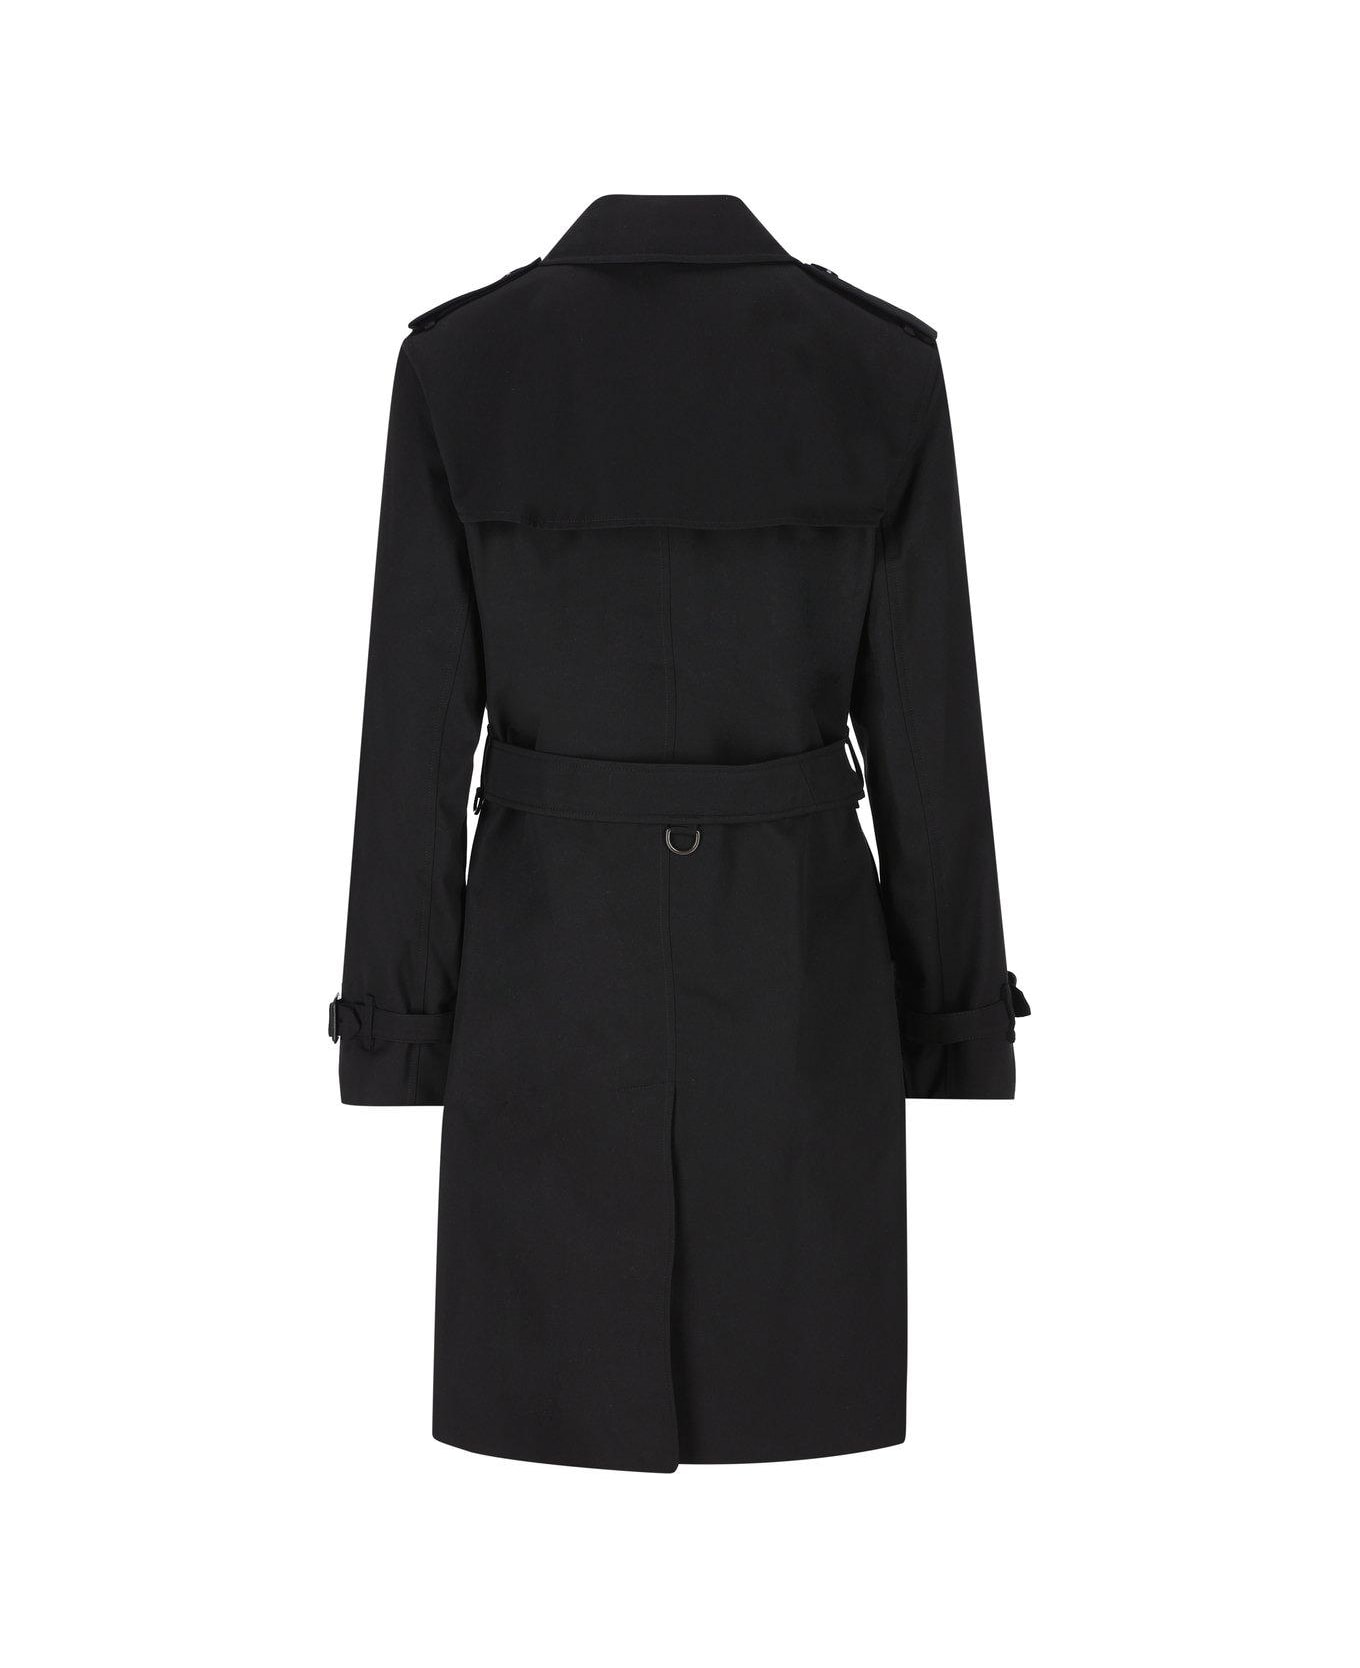 Burberry Double Breasted Belted Trench Coat - BLACK